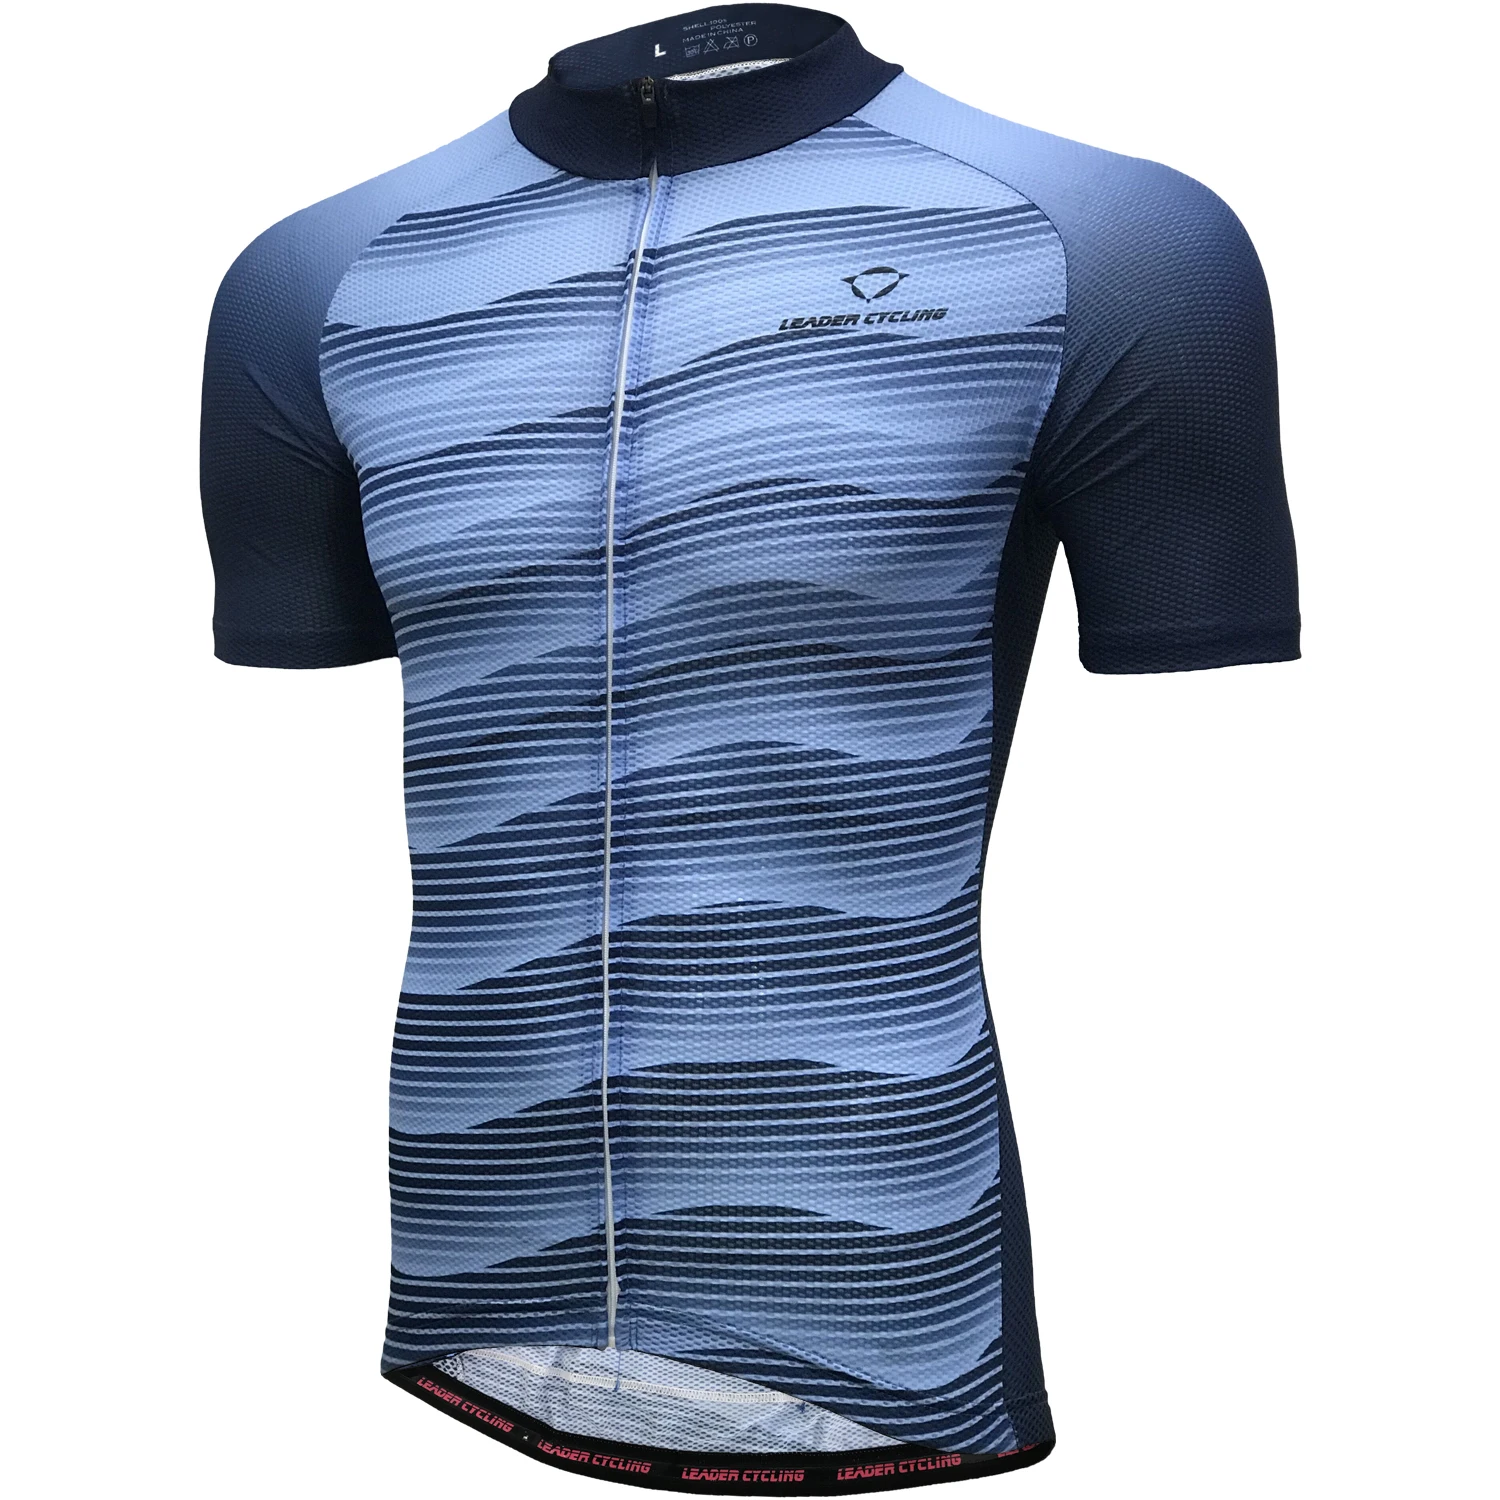 
Cycling sets Jersey bicycle bike uniform short sleeve top and pants OEM 